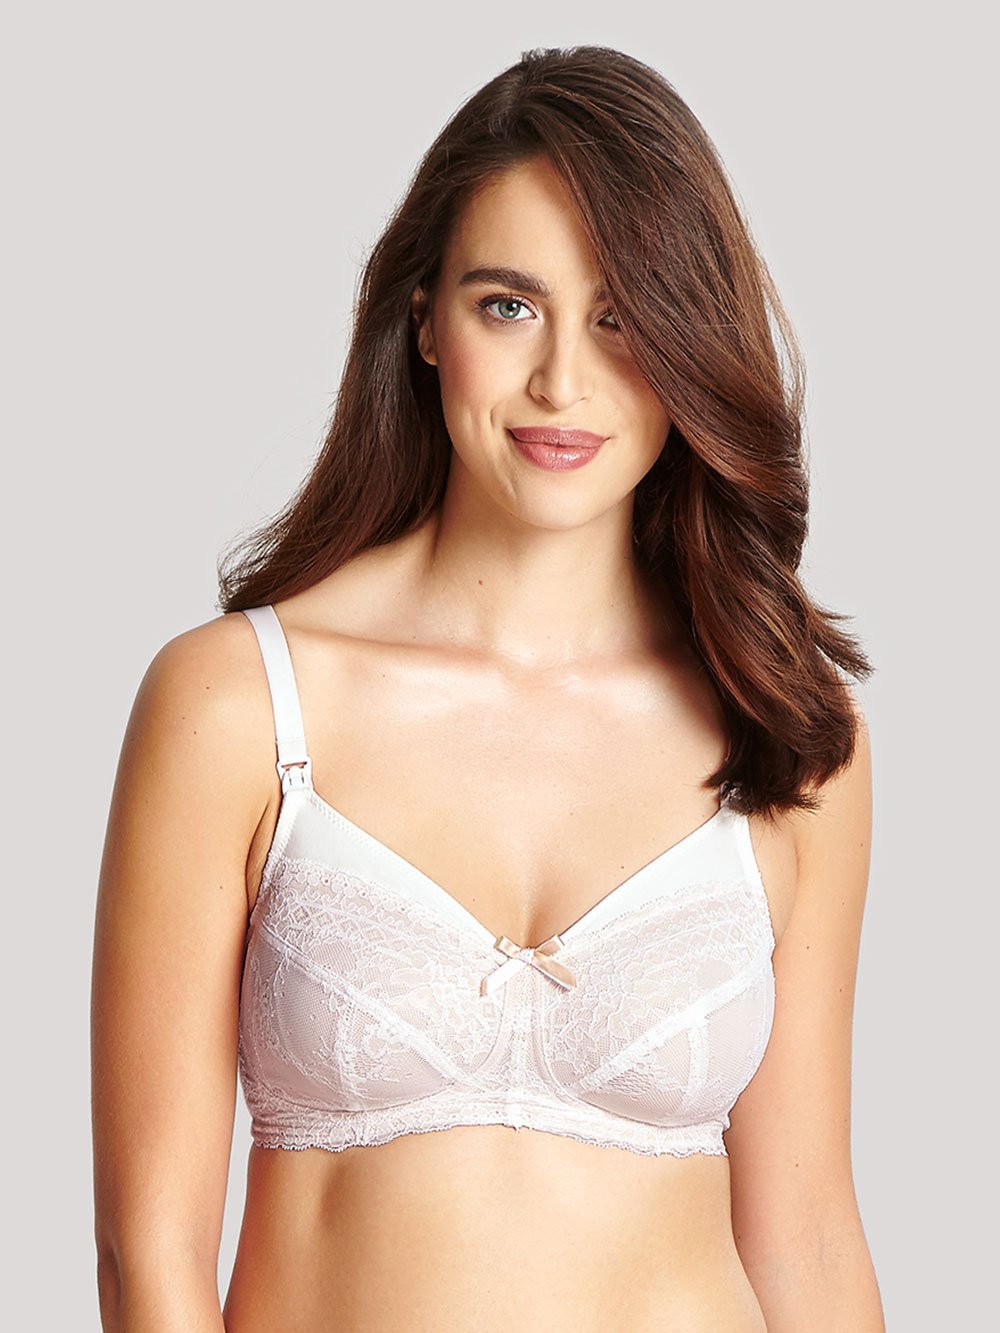 D Cup Bra: Bras for D Cup Boobs and Breast Size Getaggt Panache  Sculptresse Bras - HauteFlair